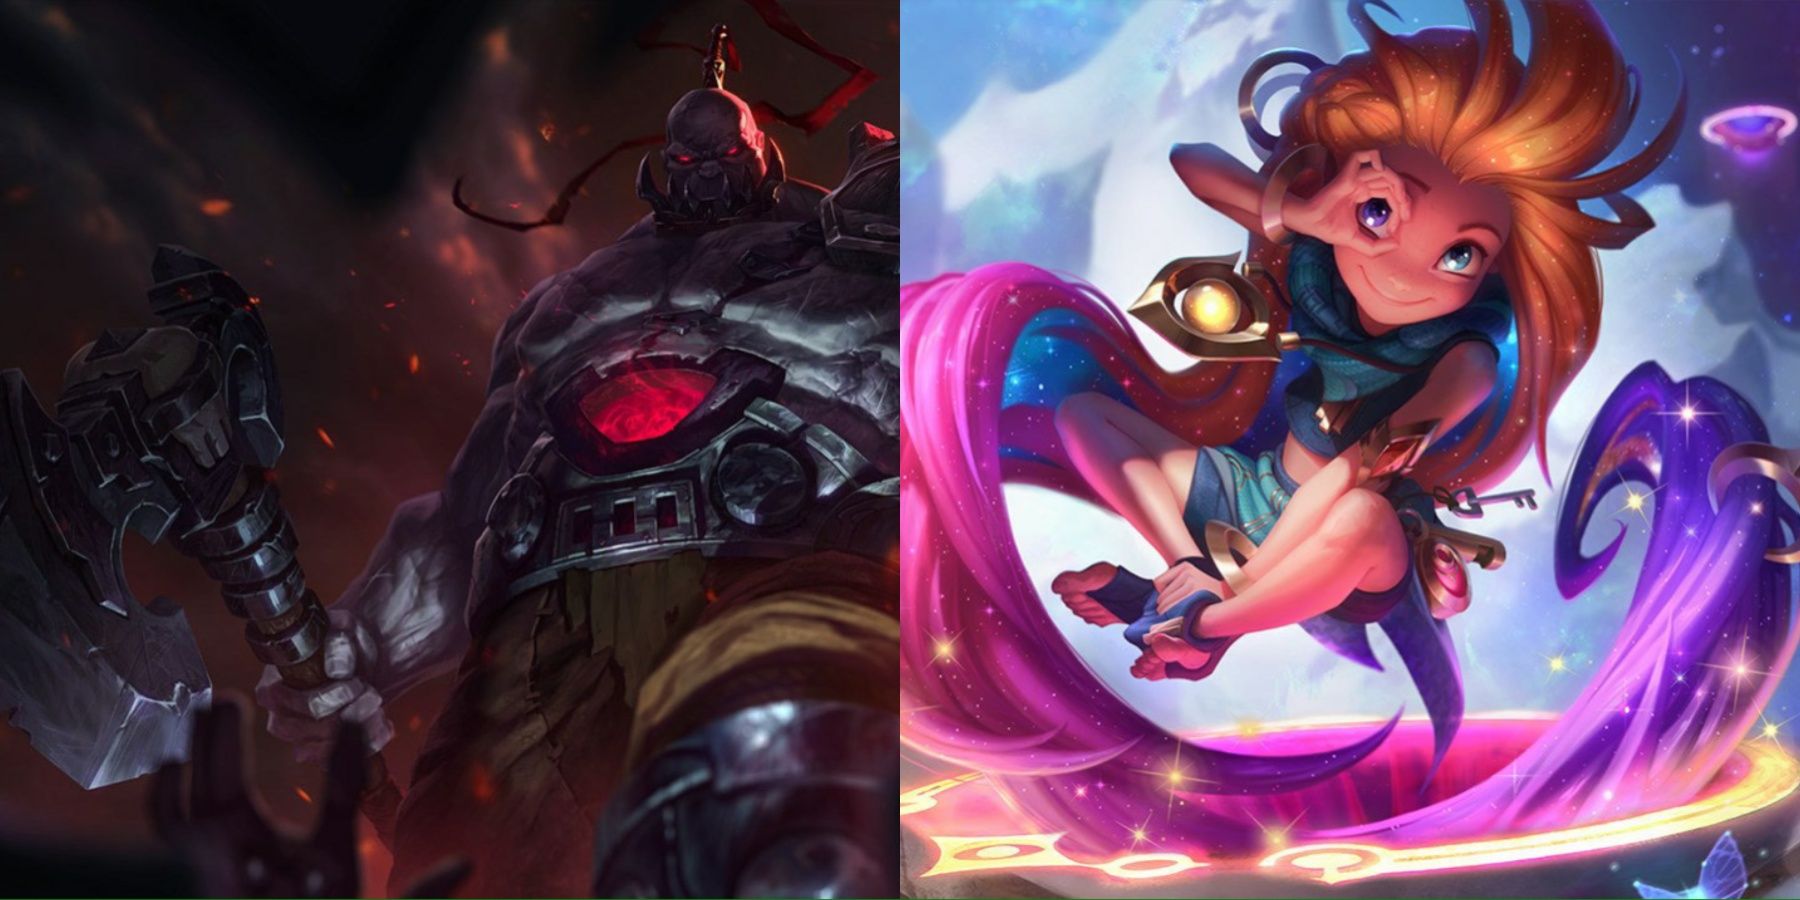 Sion & Zoe Presenting Themselves To Enemies in League of Legends